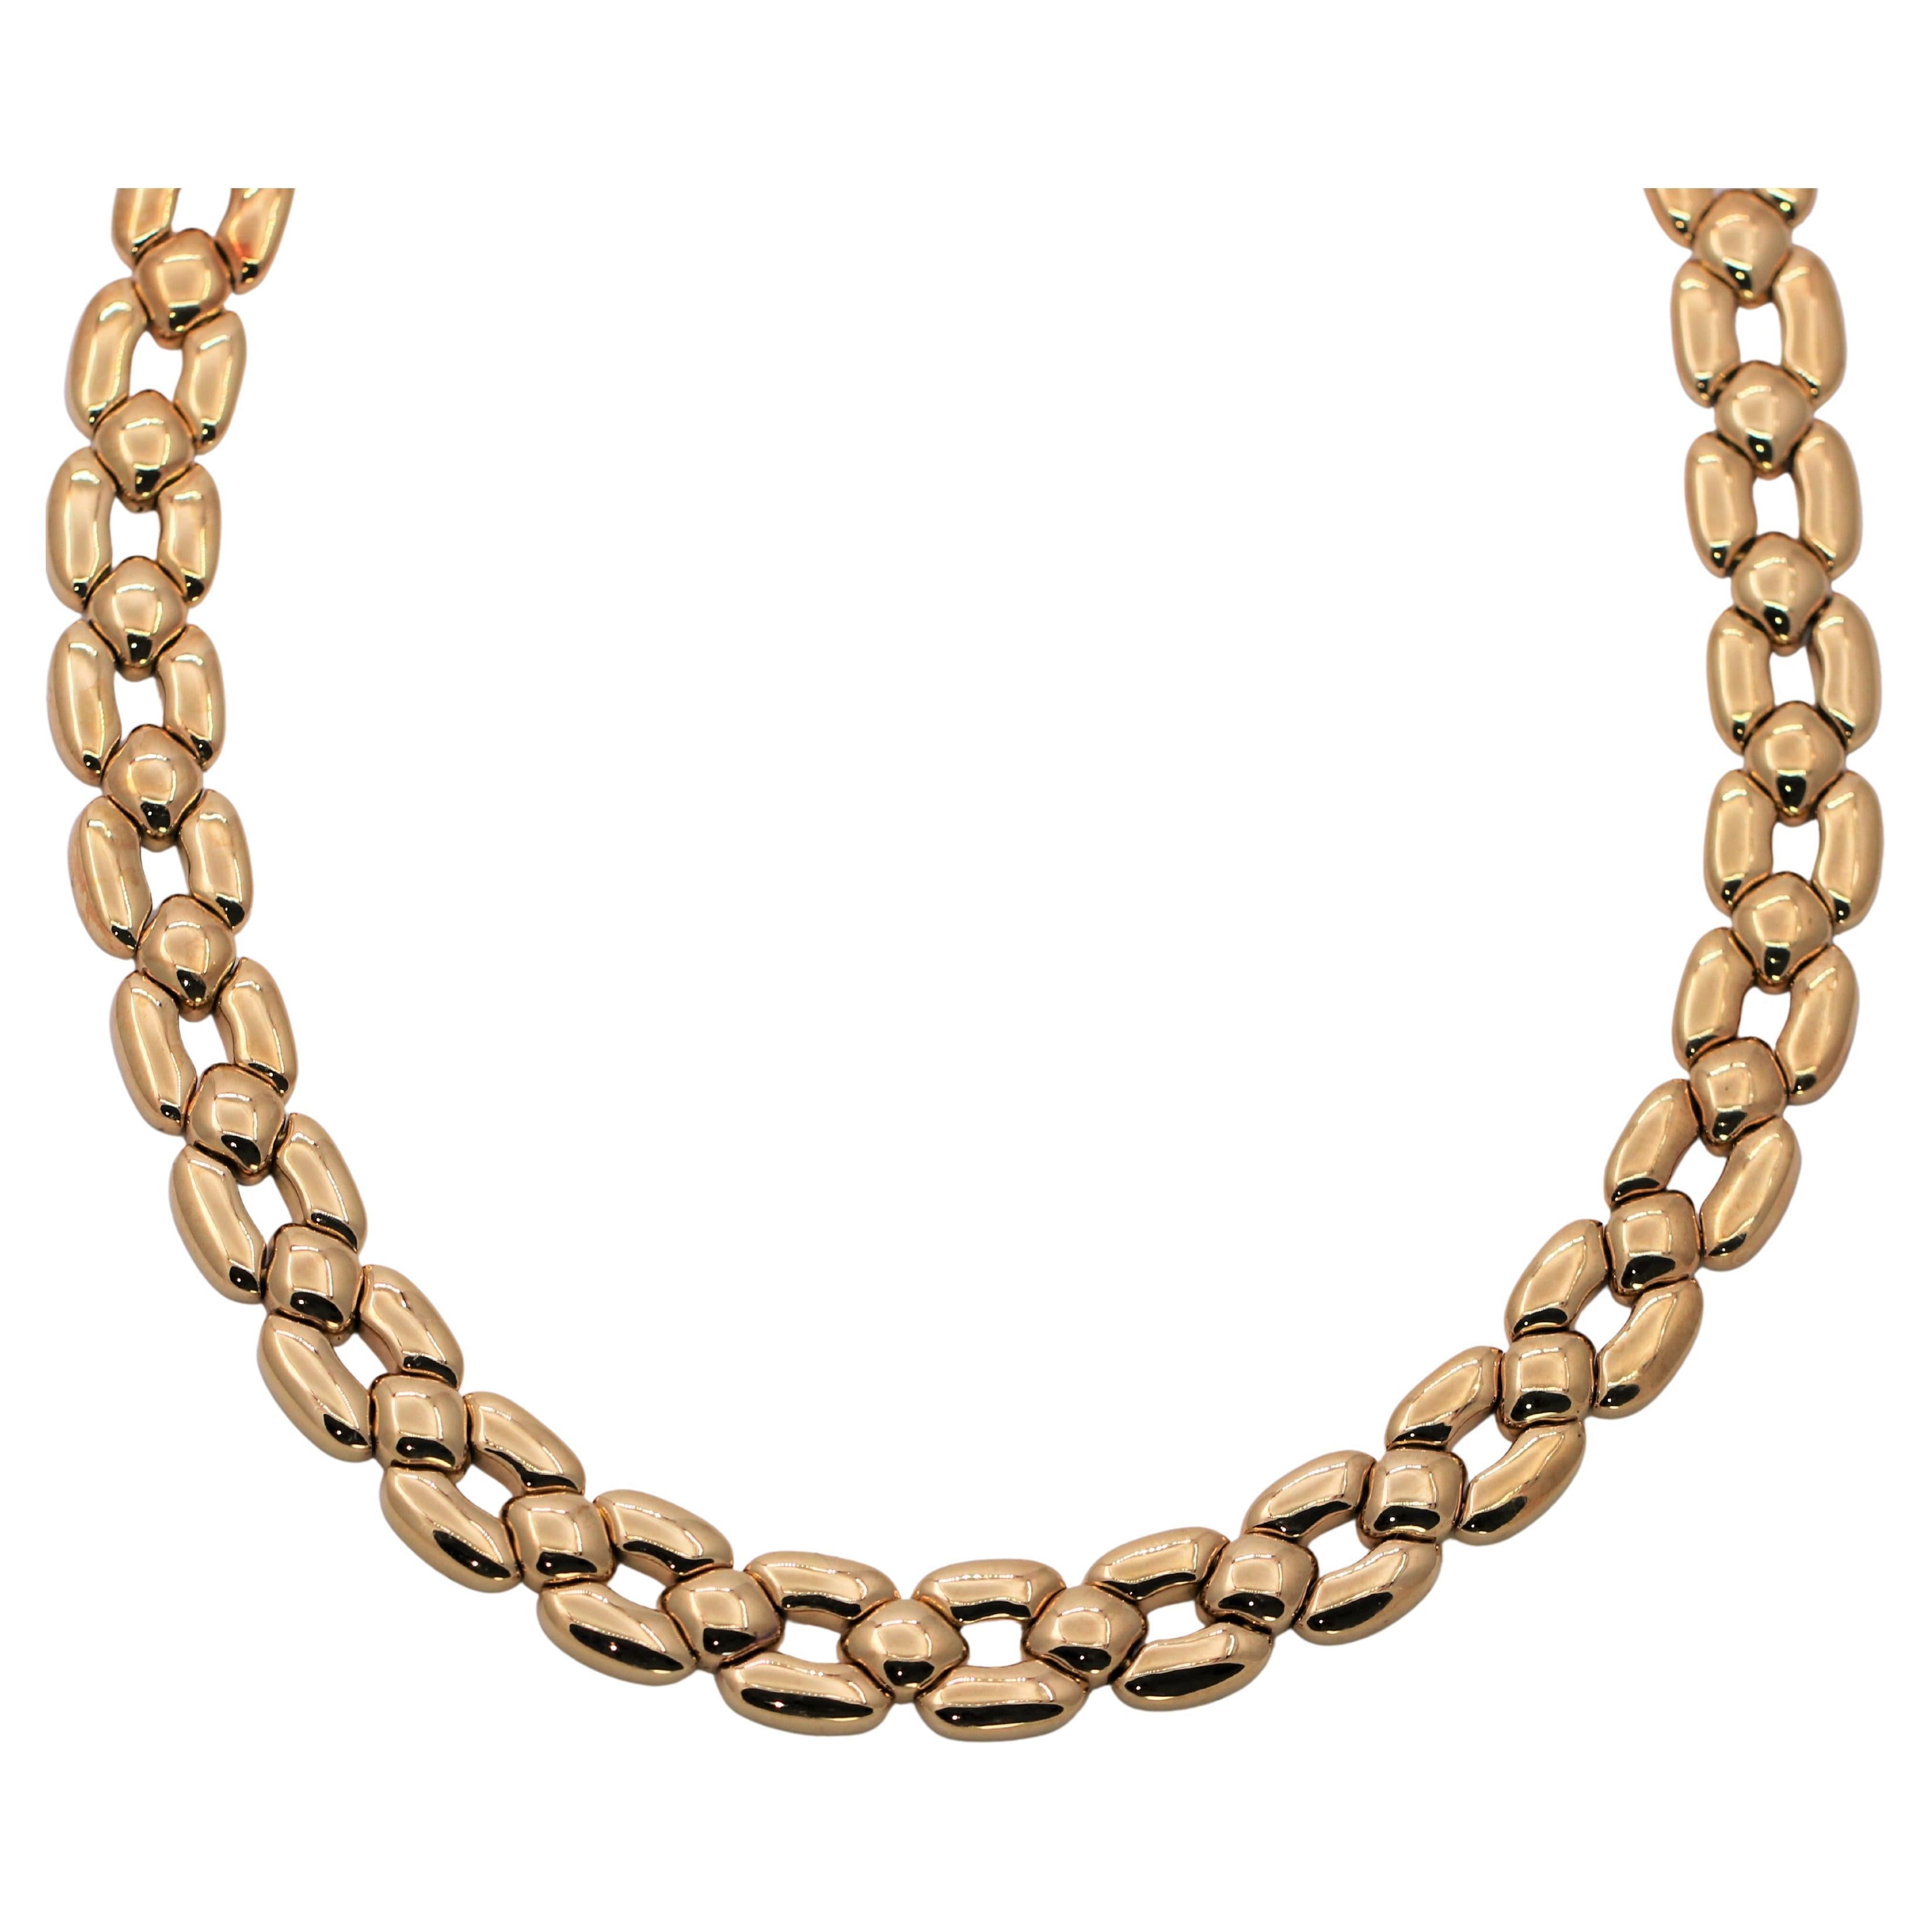 Vintage Cartier "Margot" Collection Choker Necklace